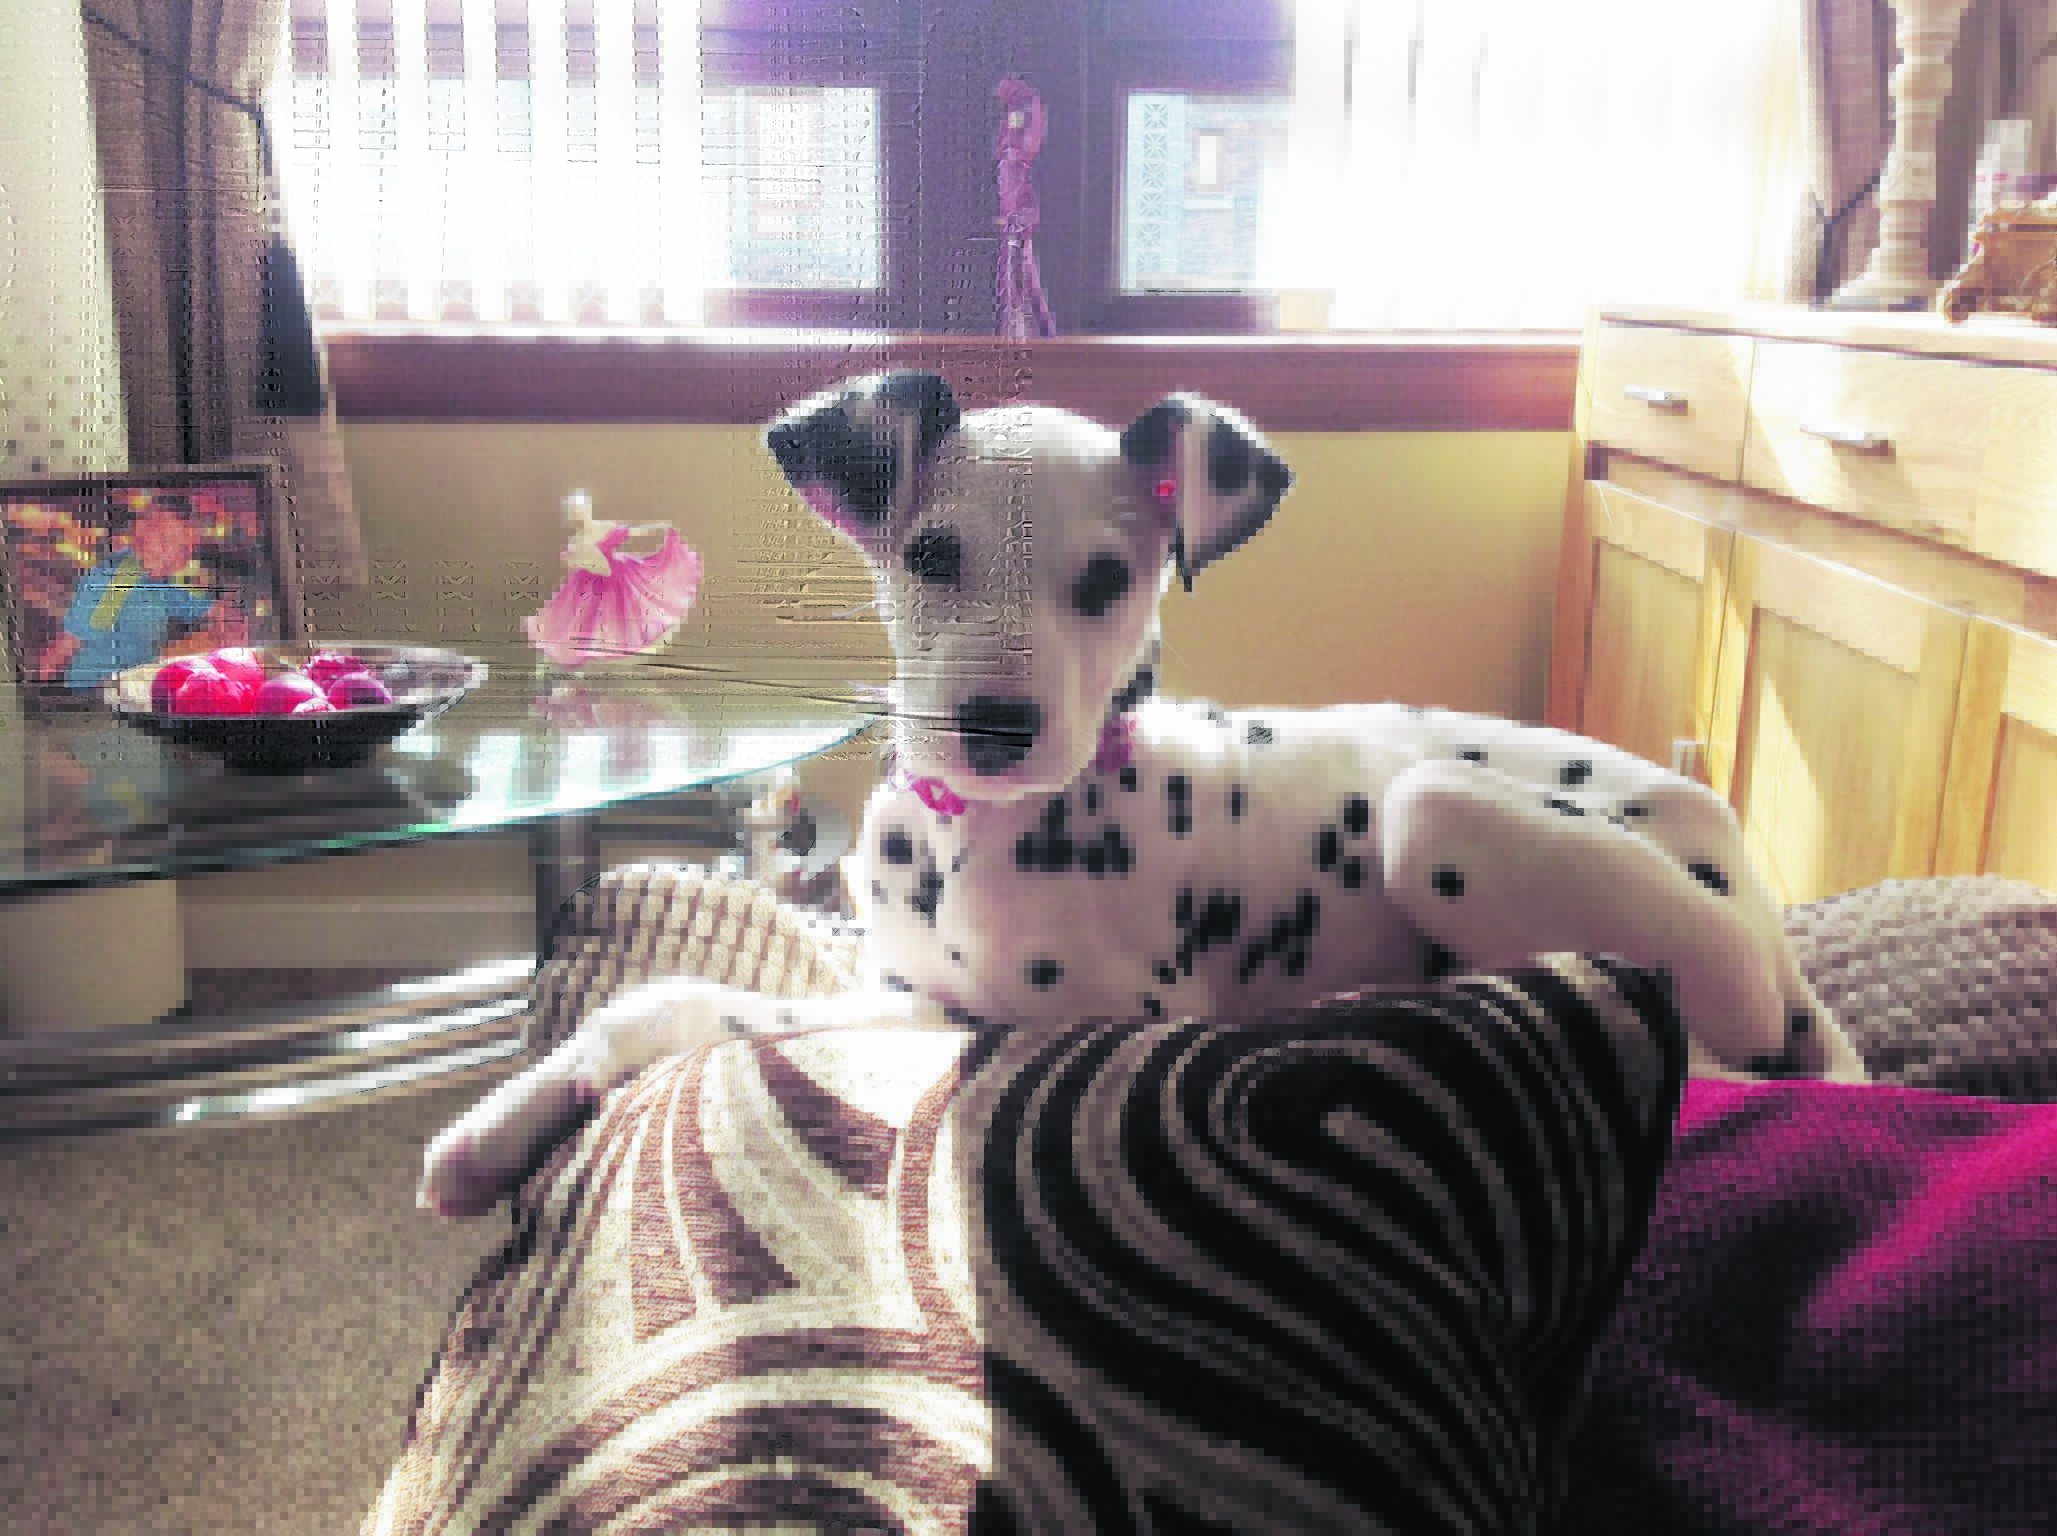 This is Rumbo, a four month old Dalmatian who lives in Portsoy with Steven Jamieson, Wendy Cormack and Jocky Jamieson. 

Rumbo is our winner this week.